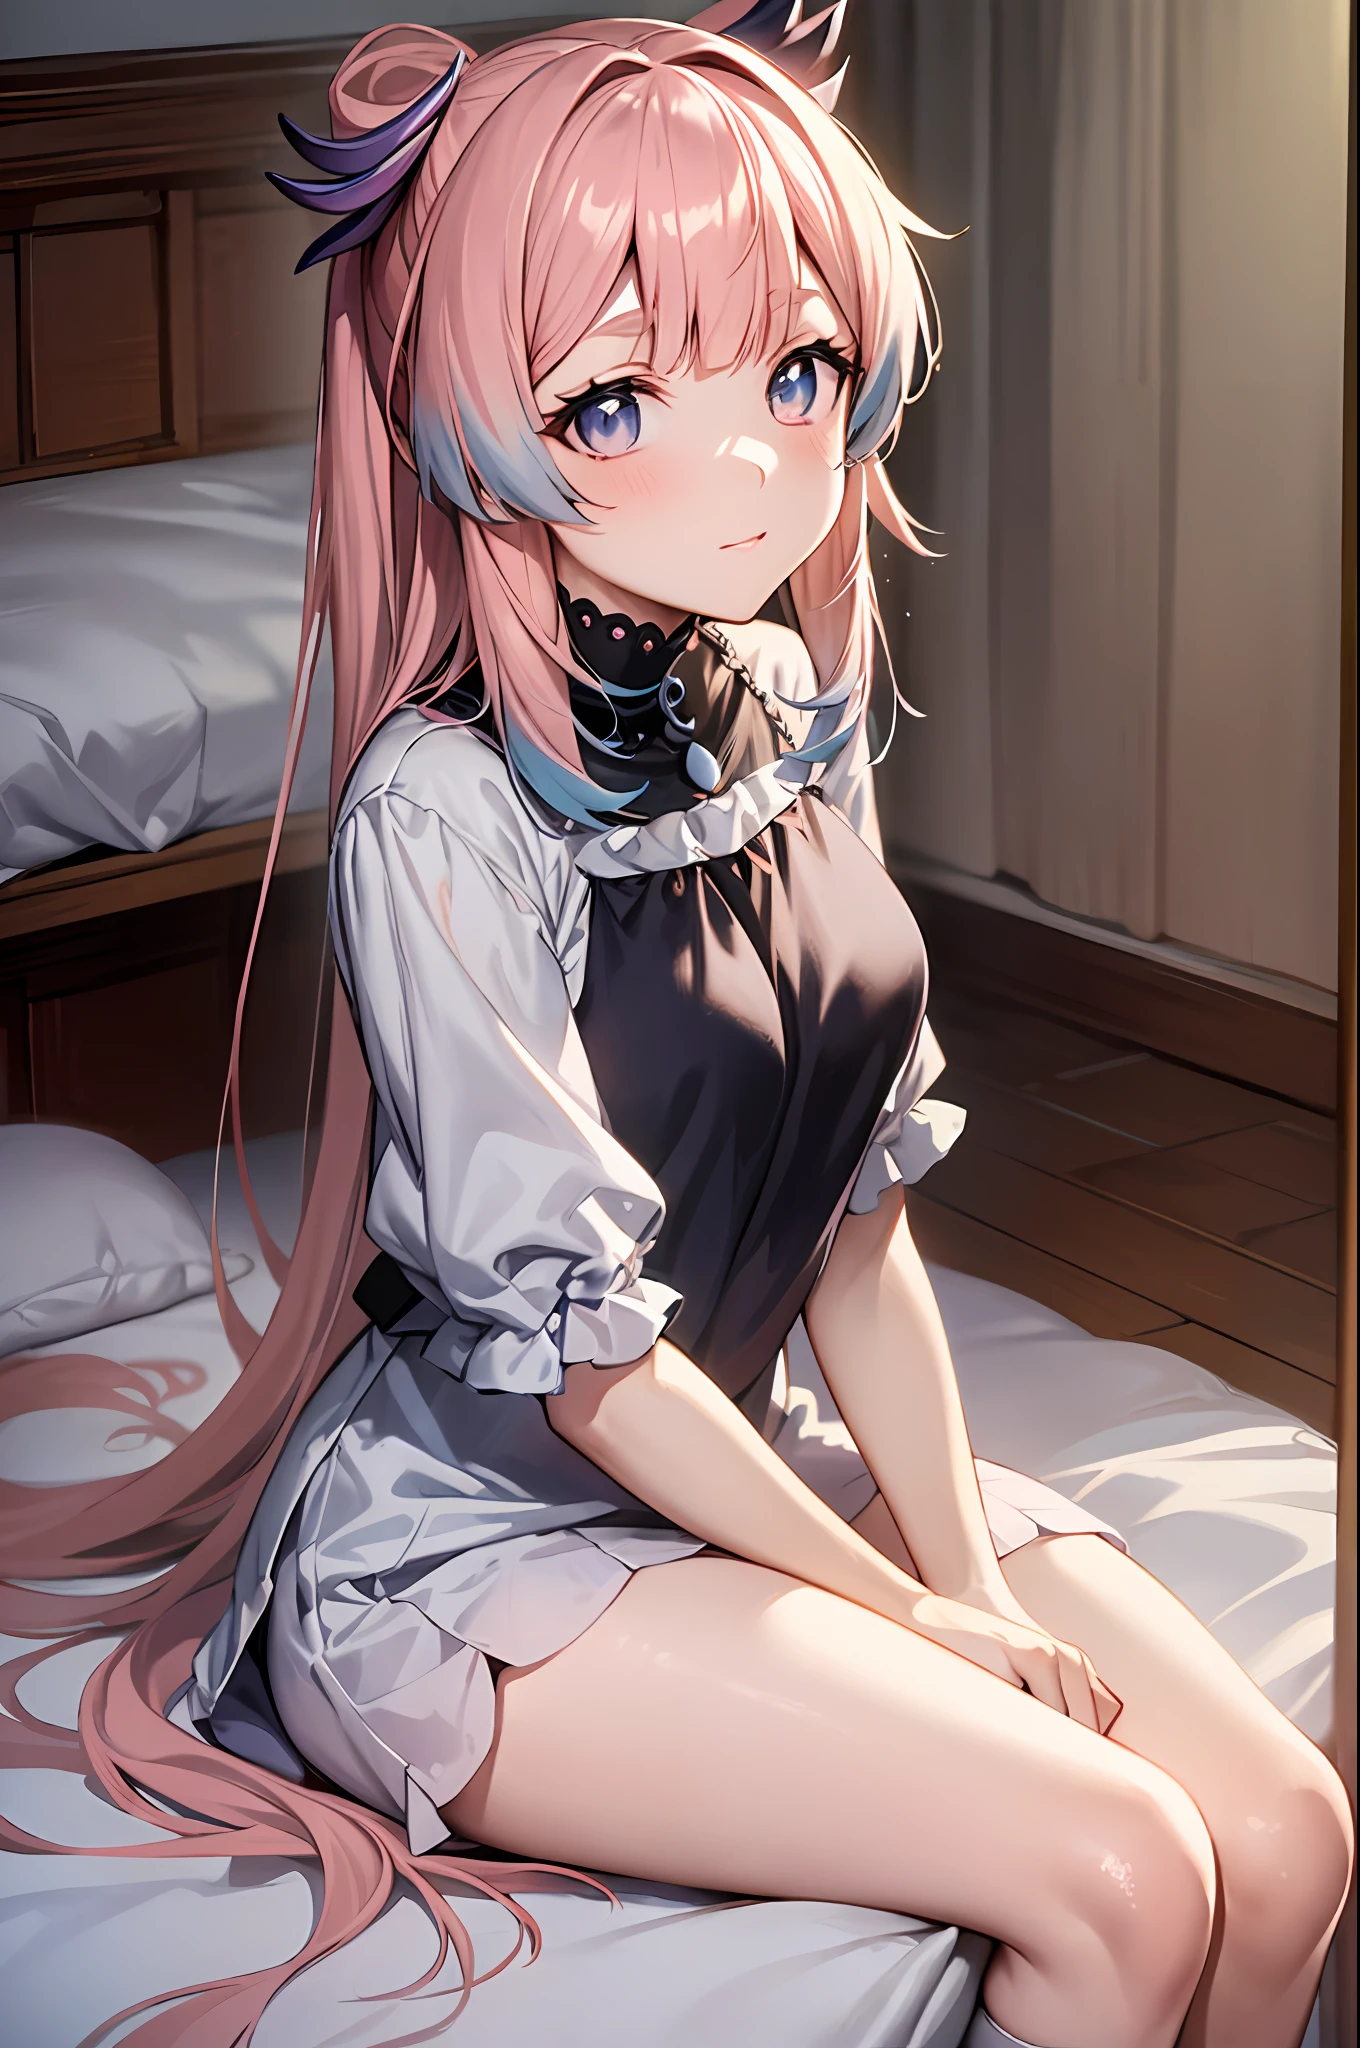 anime girl sitting on a bed with her legs crossed, seductive anime girl, pink hair, attractive anime girl, cute anime girl, anime girl, sitting on her bed, (anime girl), anime best girl, sitting on a bed, sitting on the bed, an anime girl, pretty anime girl